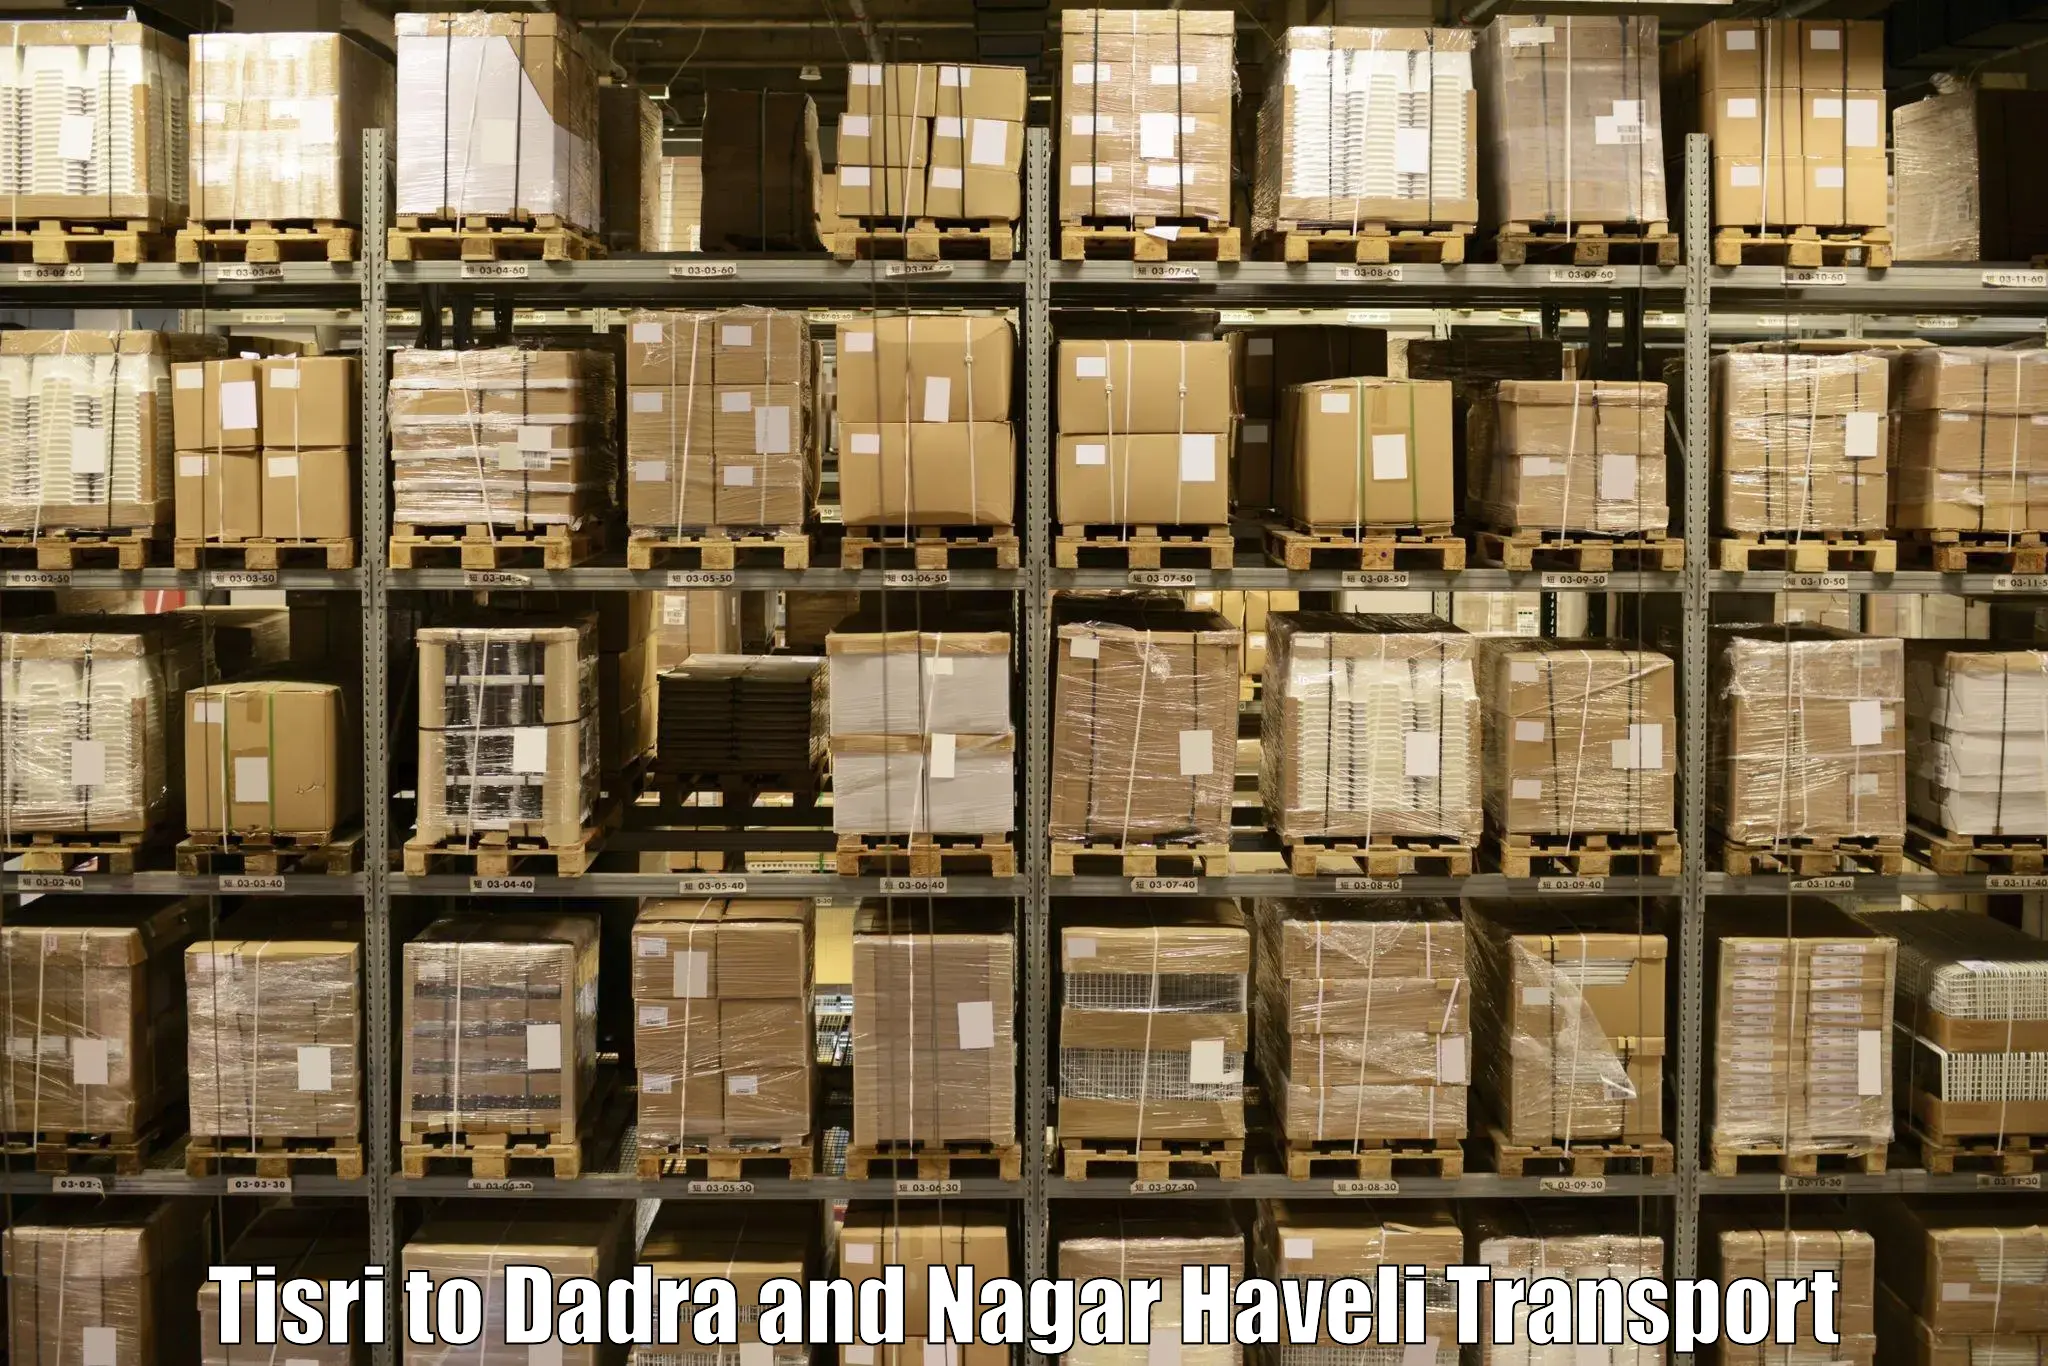 Goods delivery service Tisri to Dadra and Nagar Haveli